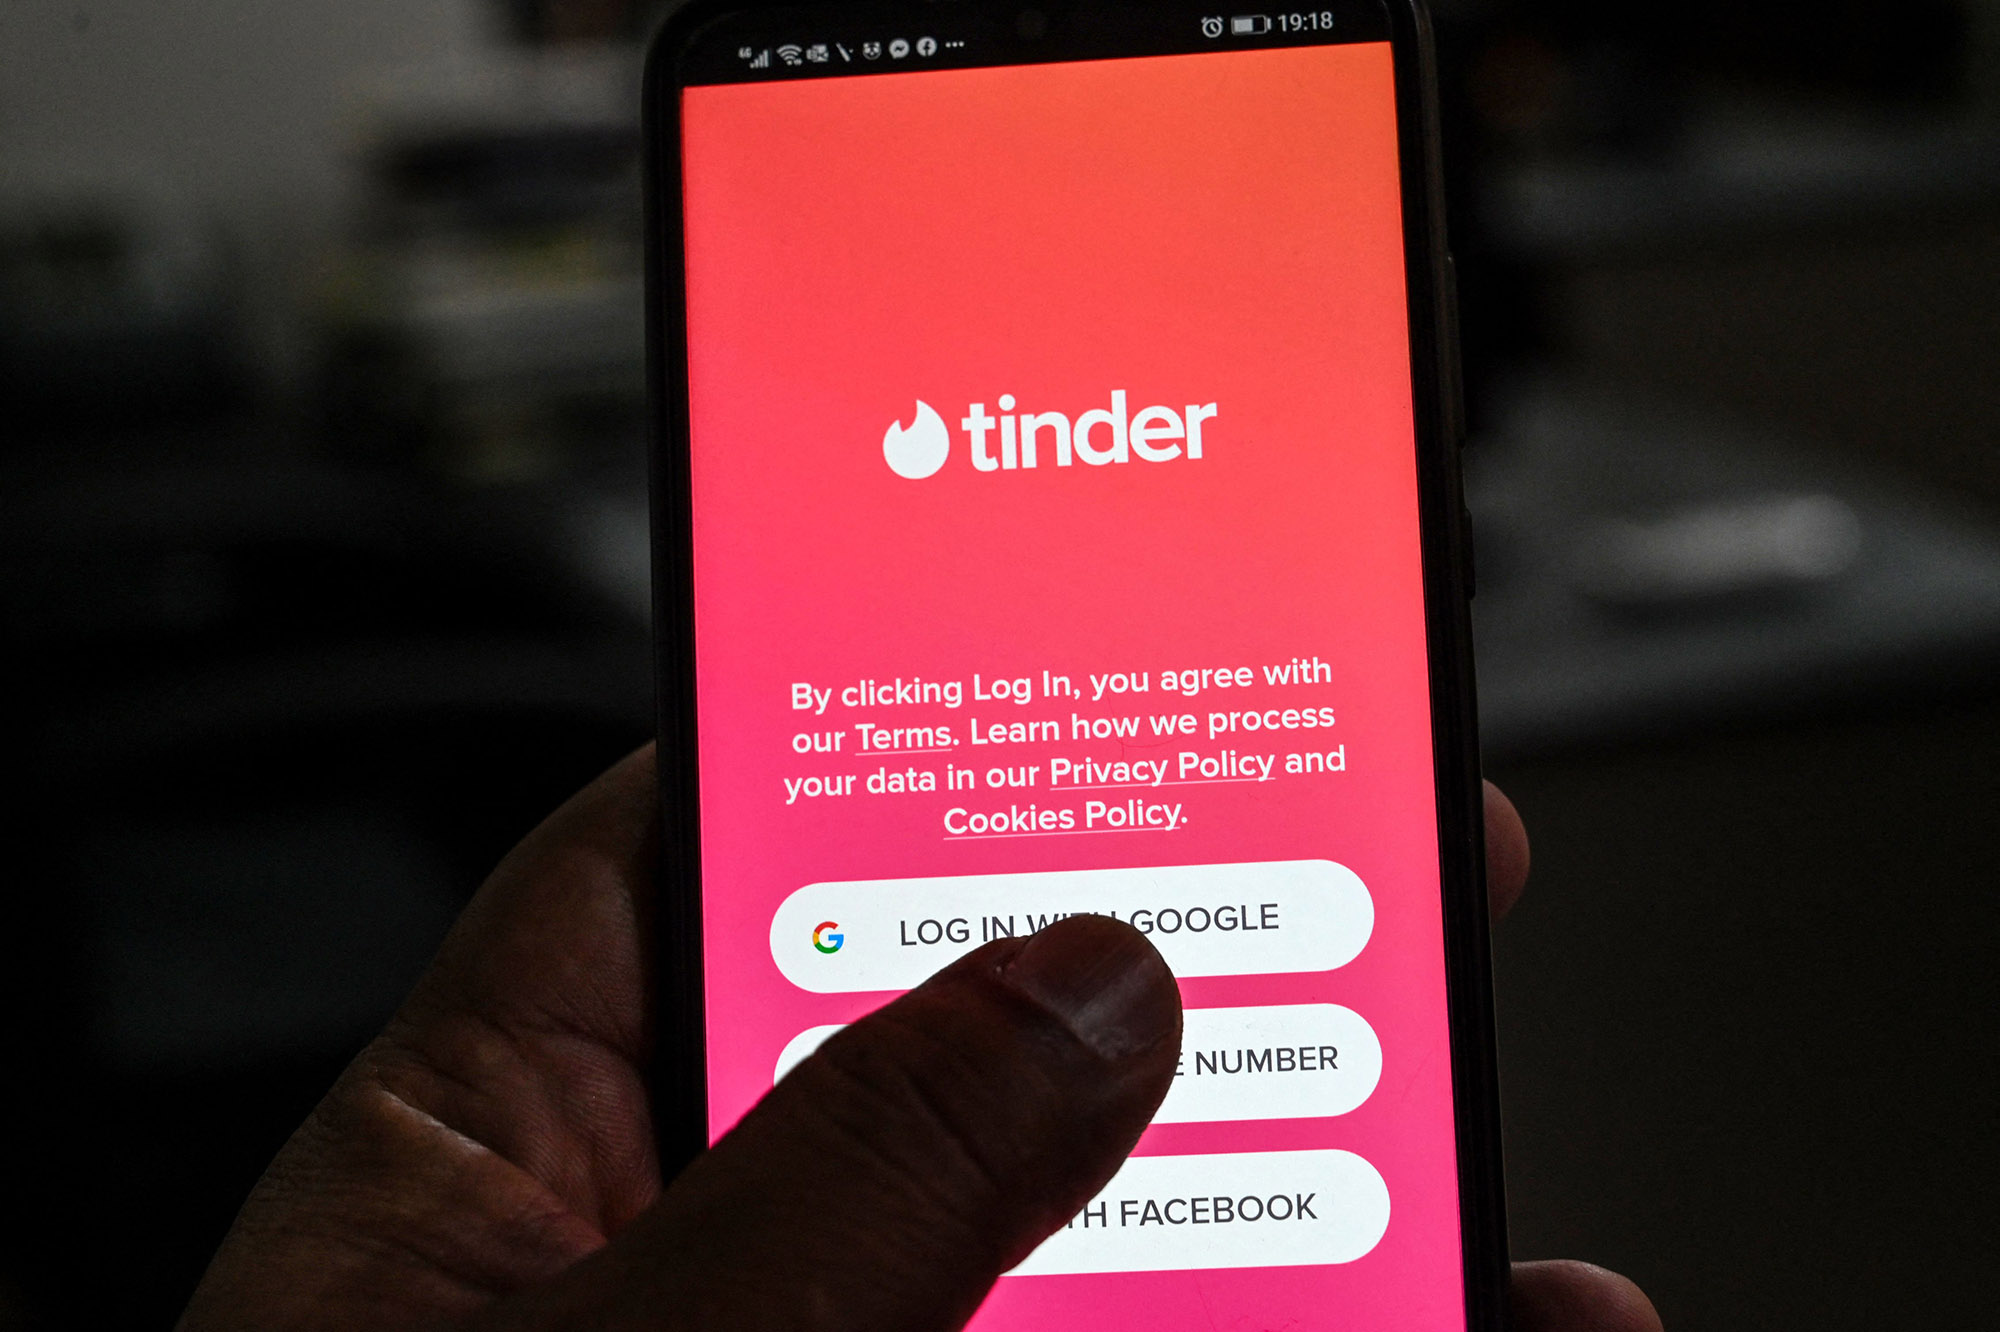 Tinder brings back the 'Blind Date' feature like we're in the 90s